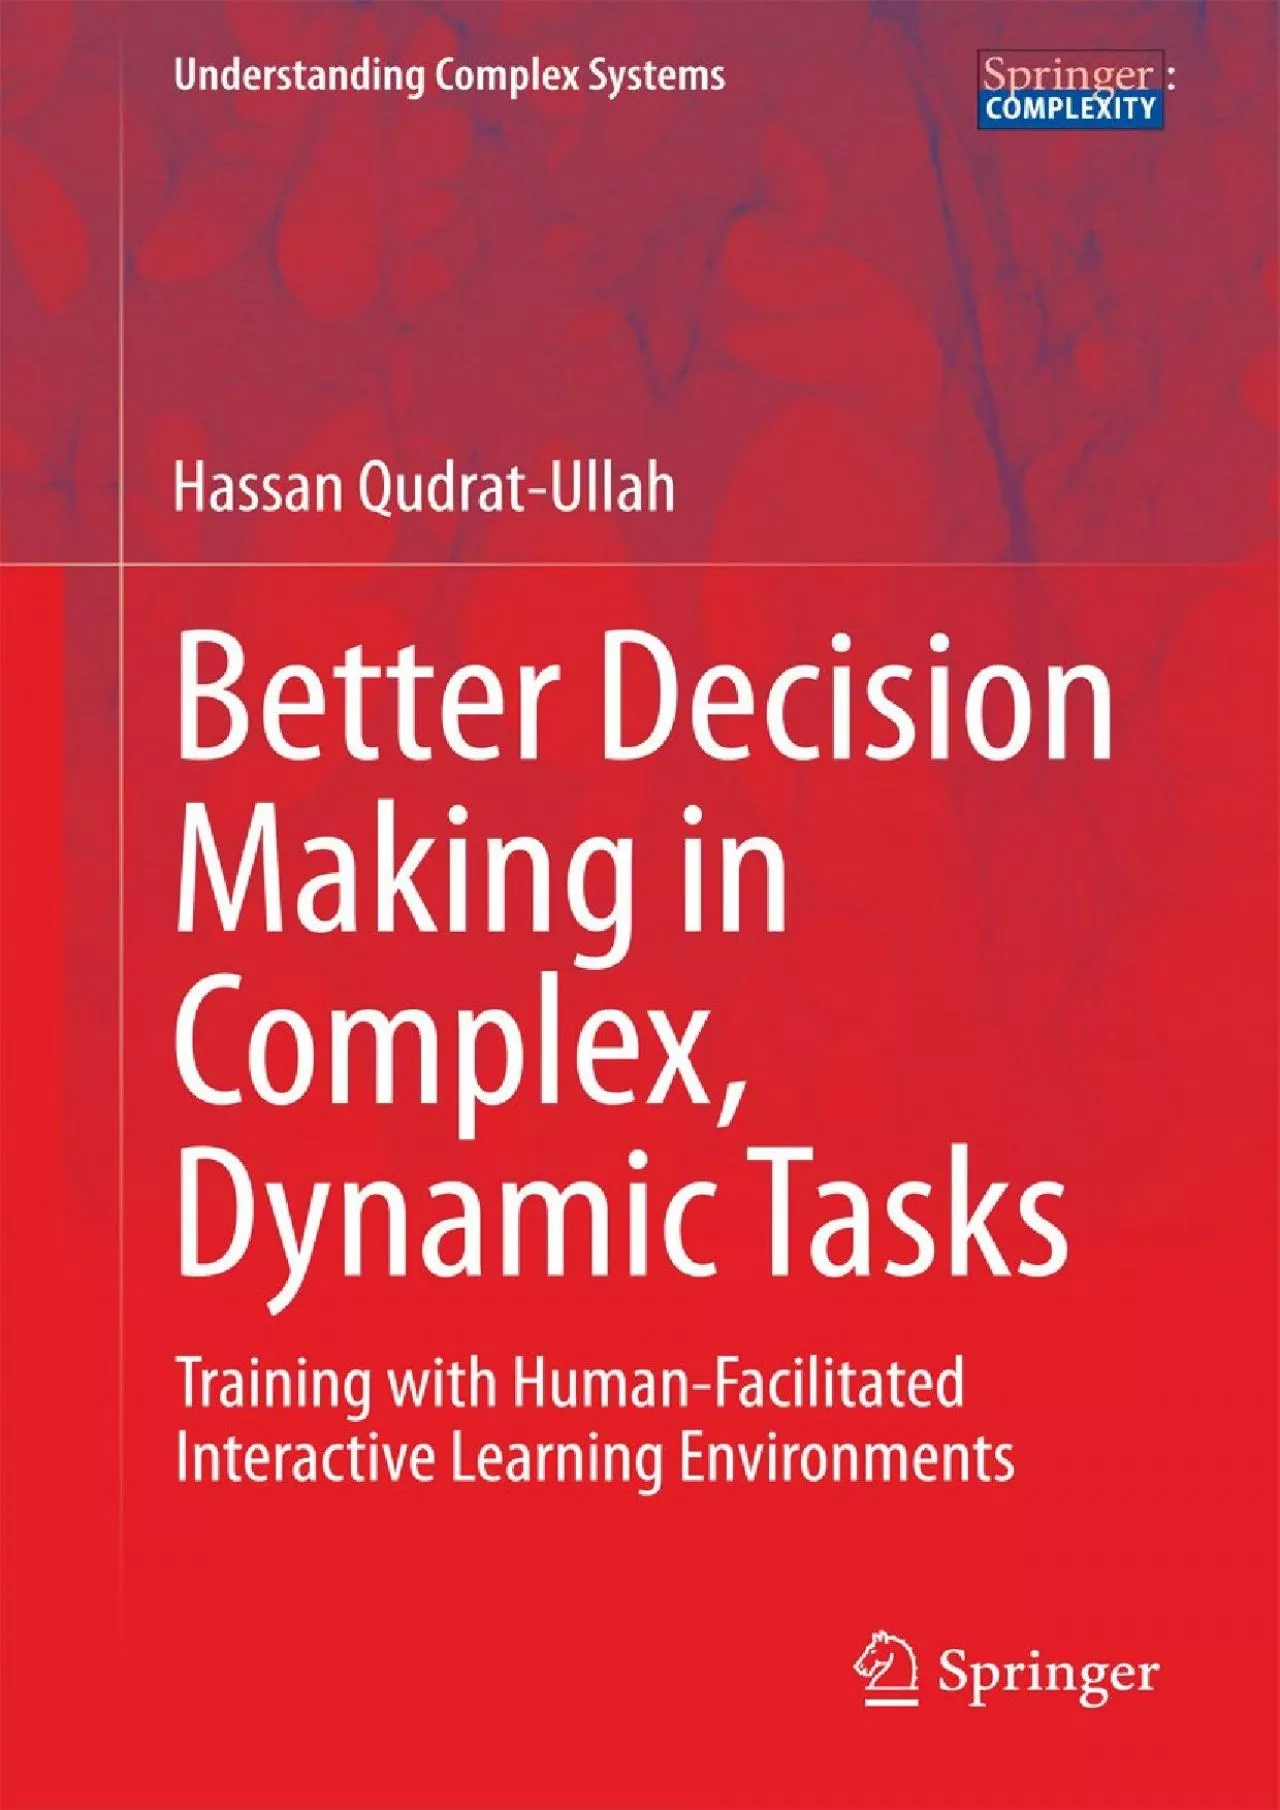 (DOWNLOAD)-Better Decision Making in Complex Dynamic Tasks Training with Human-Facilitated